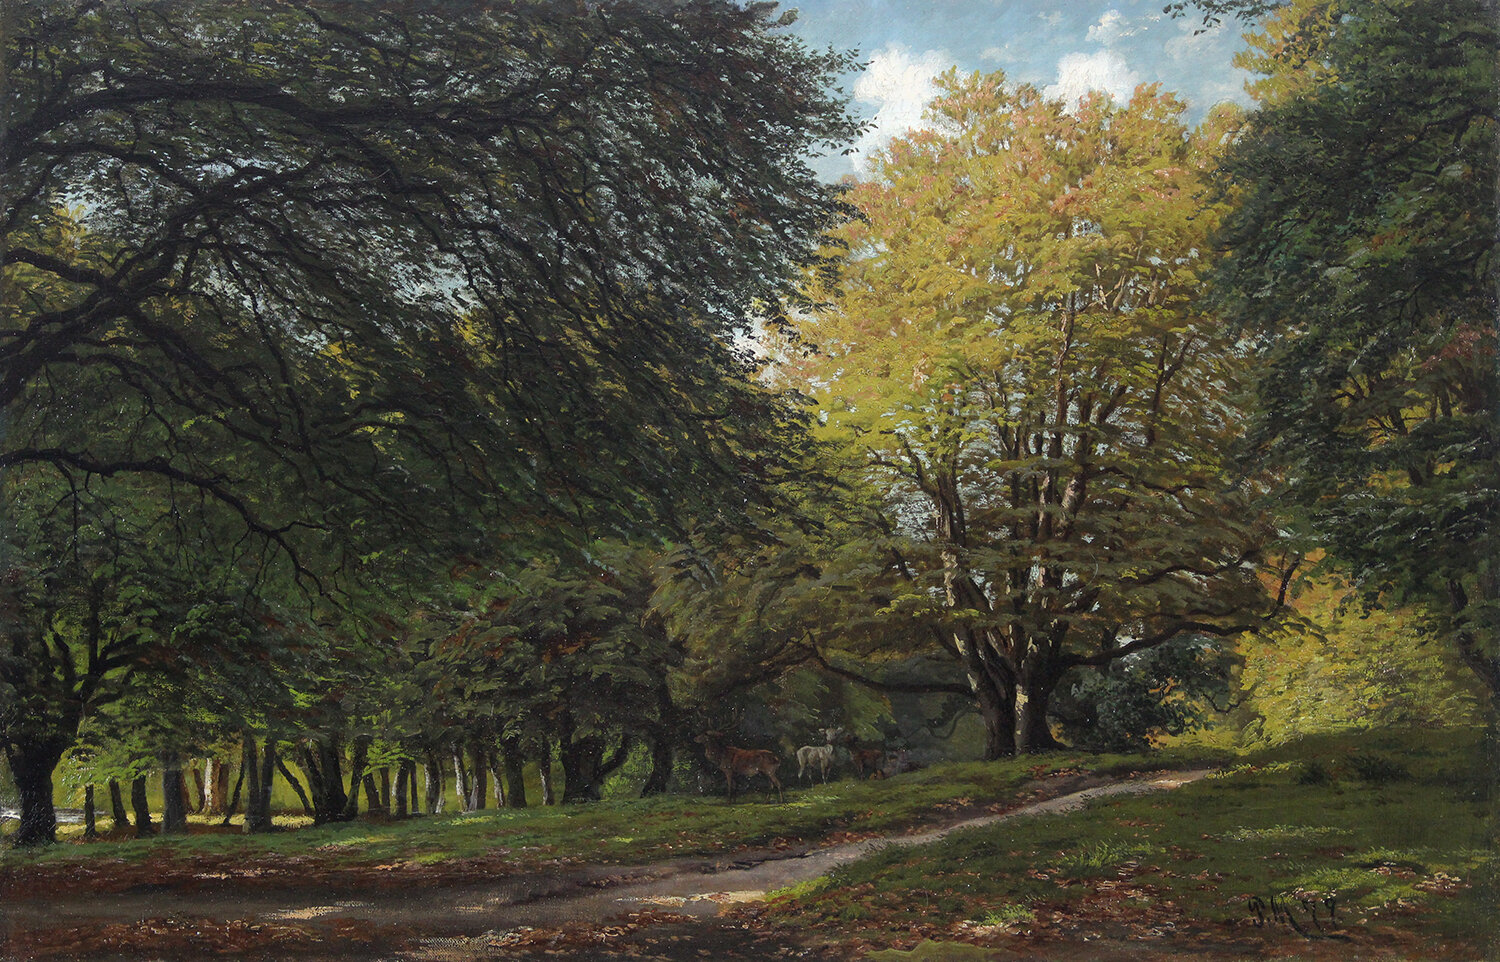 Peder M. Monsted (Danish 1859-1941) 'A View of a Forest Glade with Deer in Dyrehaven Park'